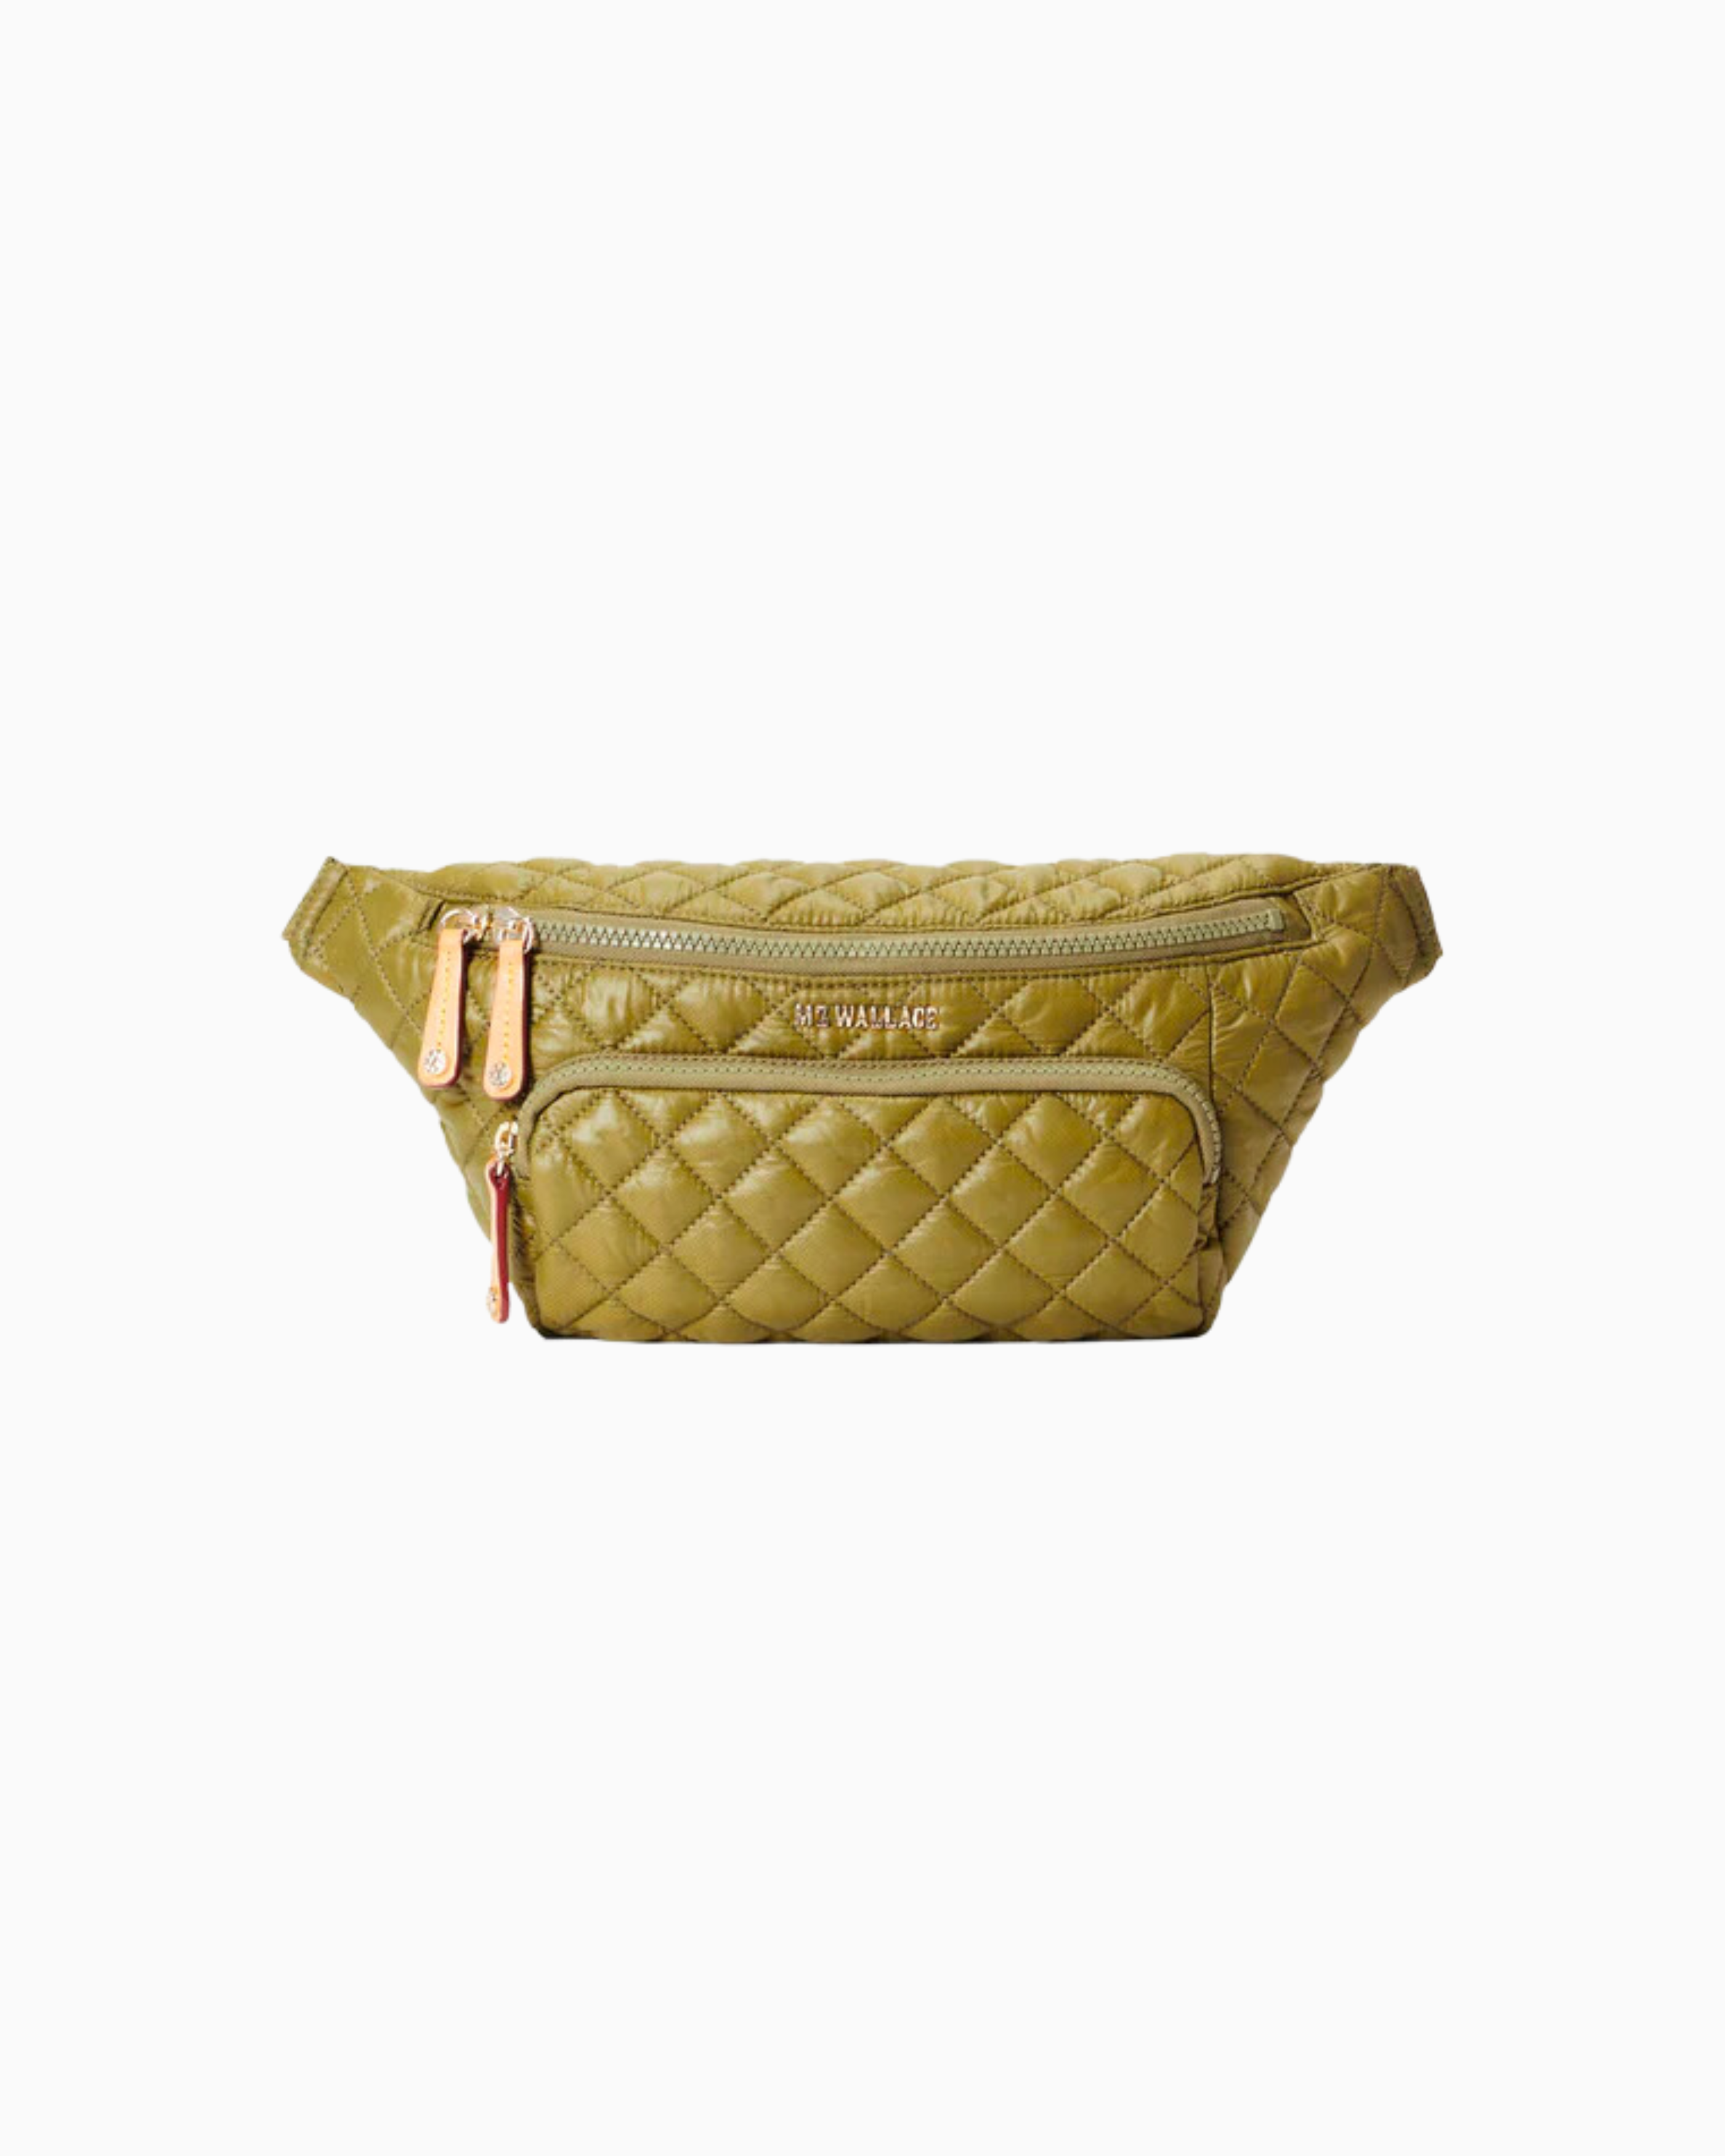 MZ Wallace Small Metro Sling in Moss